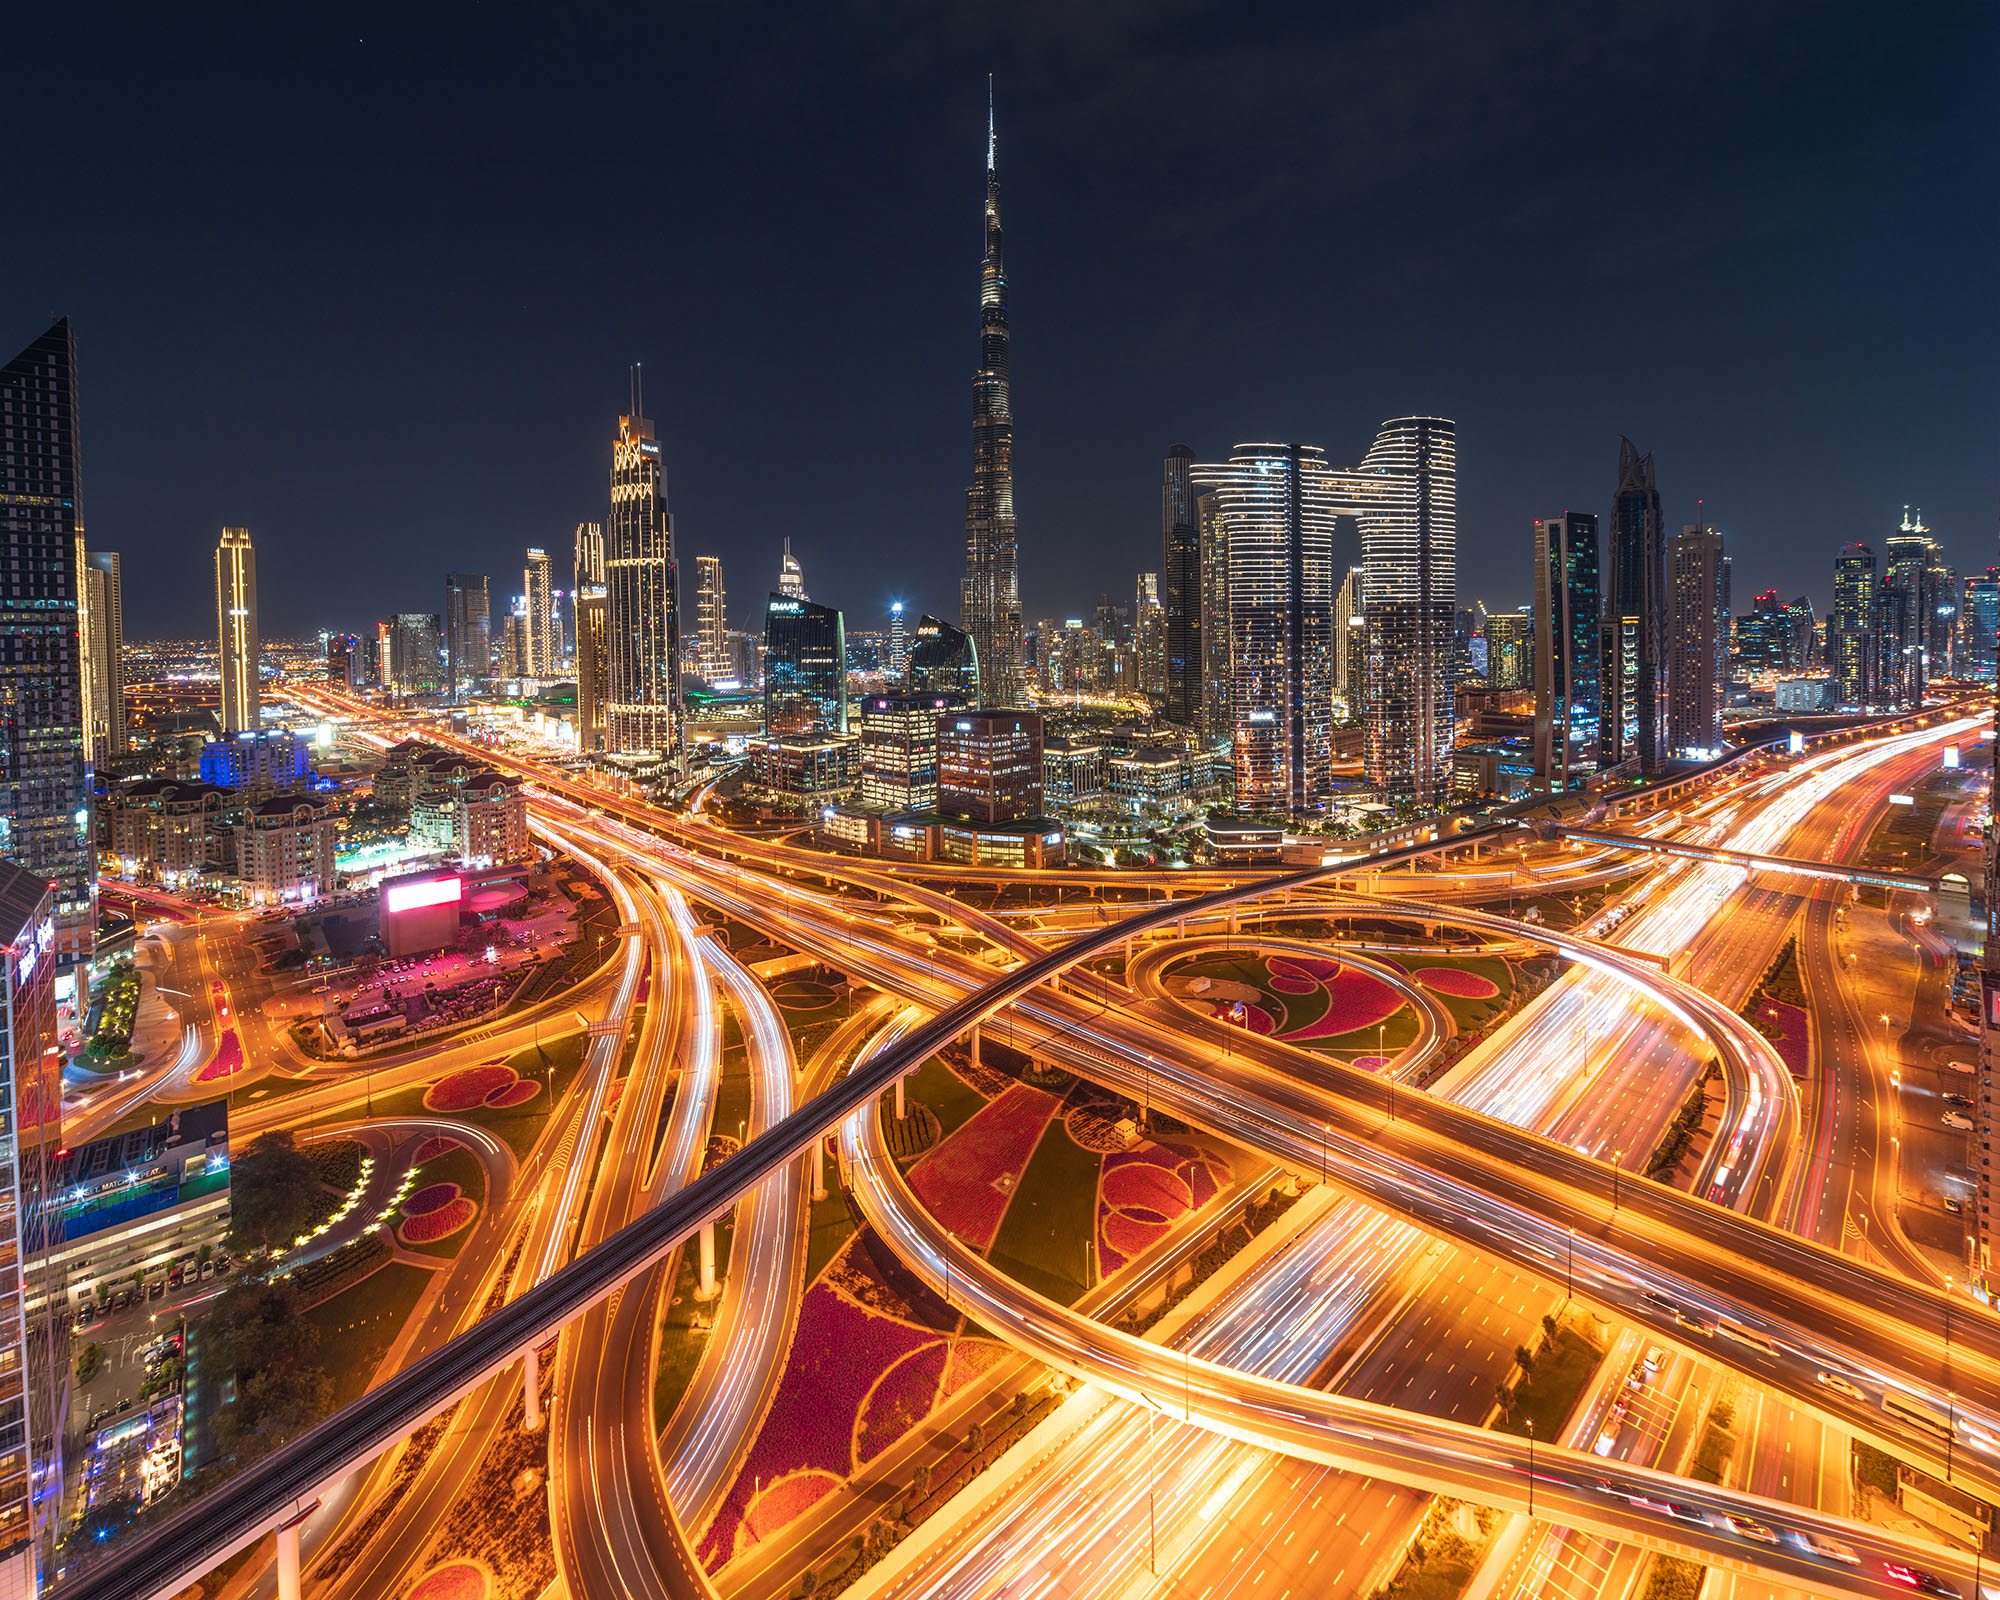 This photograph, taken at night in Dubai, UAE, presents a sprawling and intricate highway interchange, brilliantly illuminated...